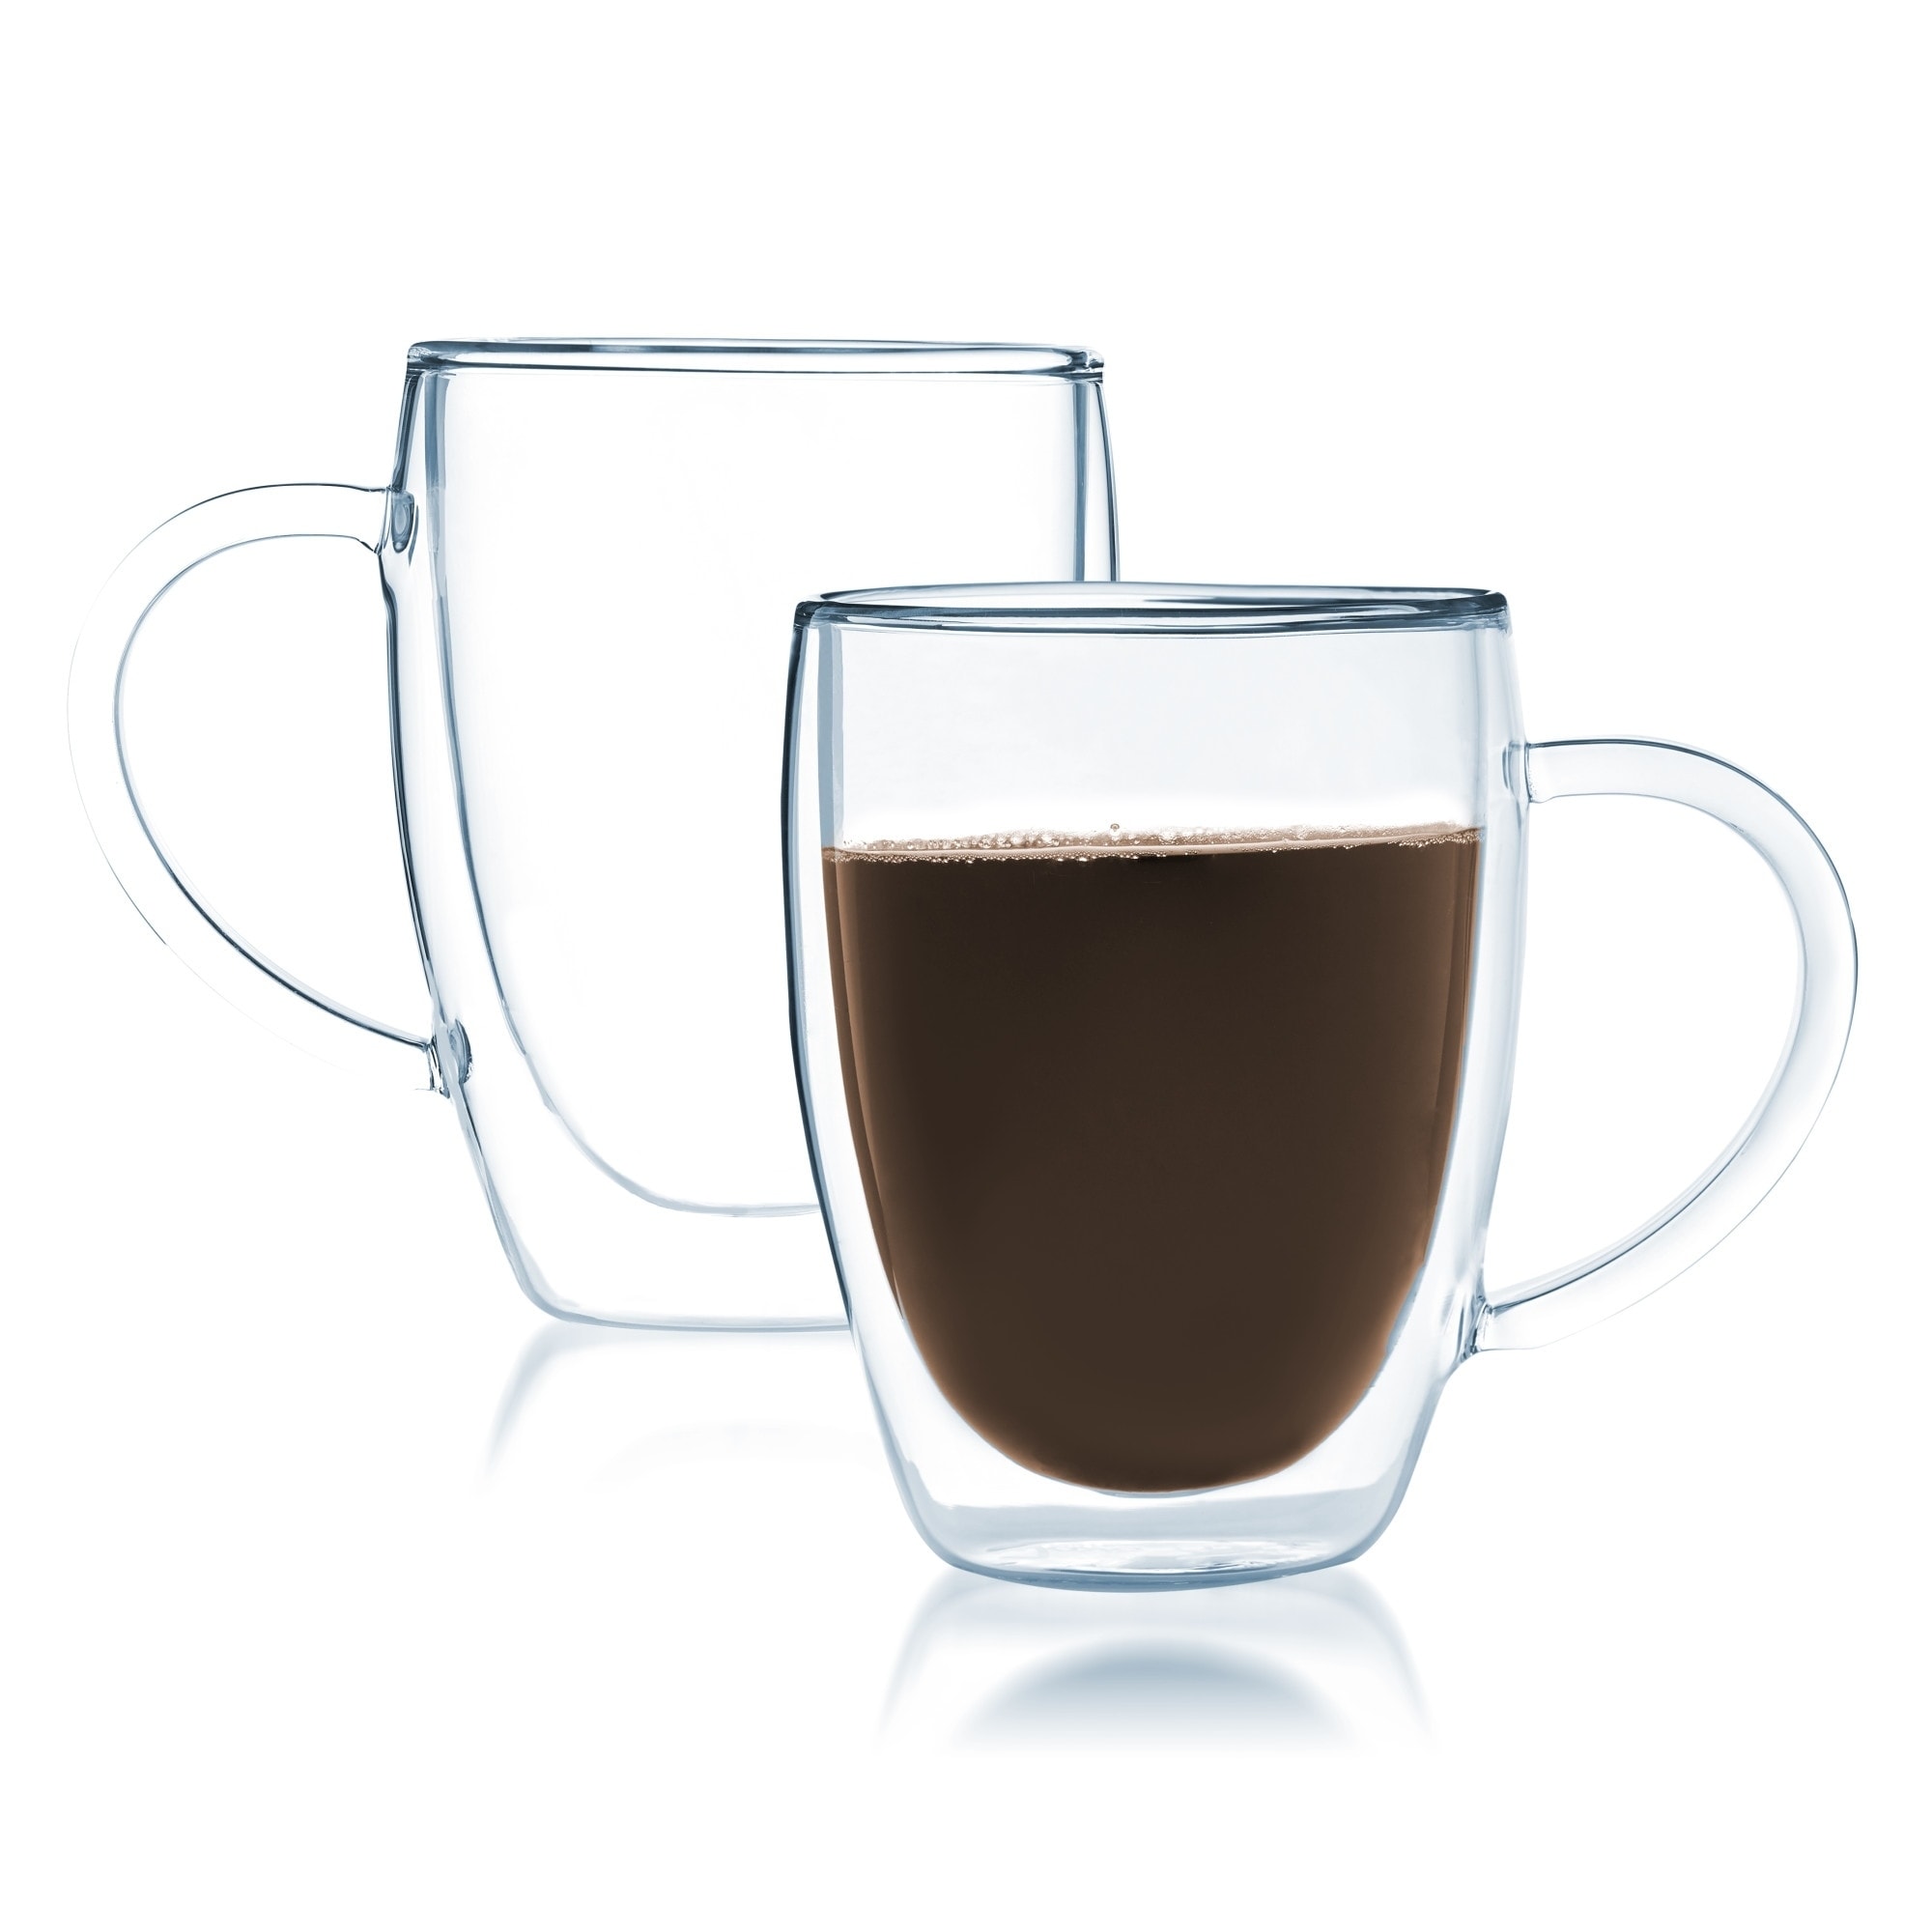 https://ak1.ostkcdn.com/images/products/14427905/JavaFly-Clear-Glass-12-ounce-Double-walled-Thermo-Bistro-Mug-with-Handle-Set-of-2-c28491cc-725d-4c6b-a82d-d99df10546ba.jpg